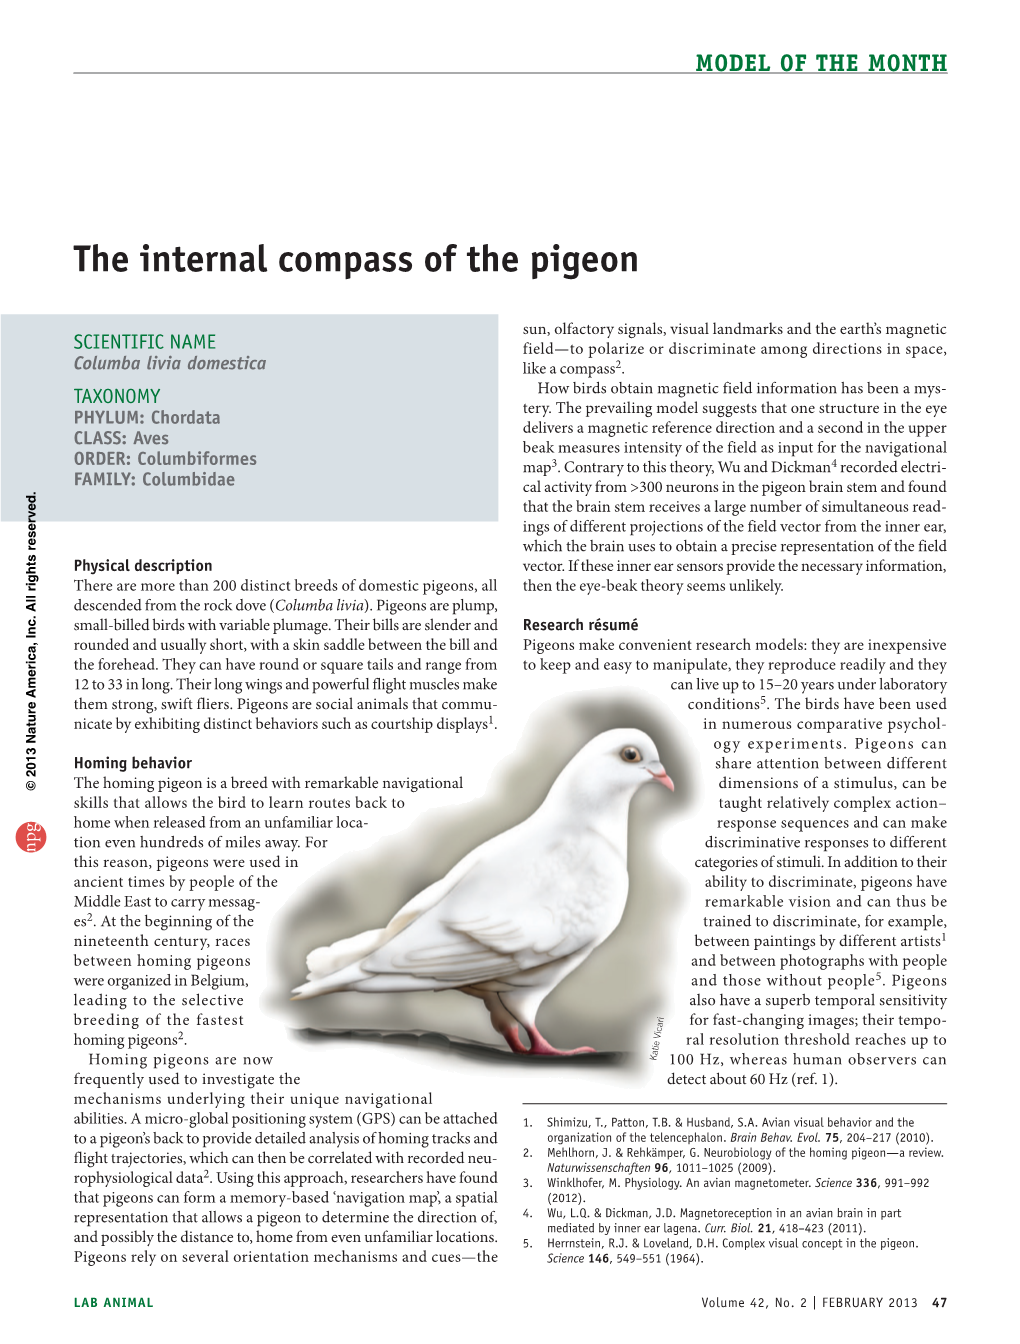 The Internal Compass of the Pigeon